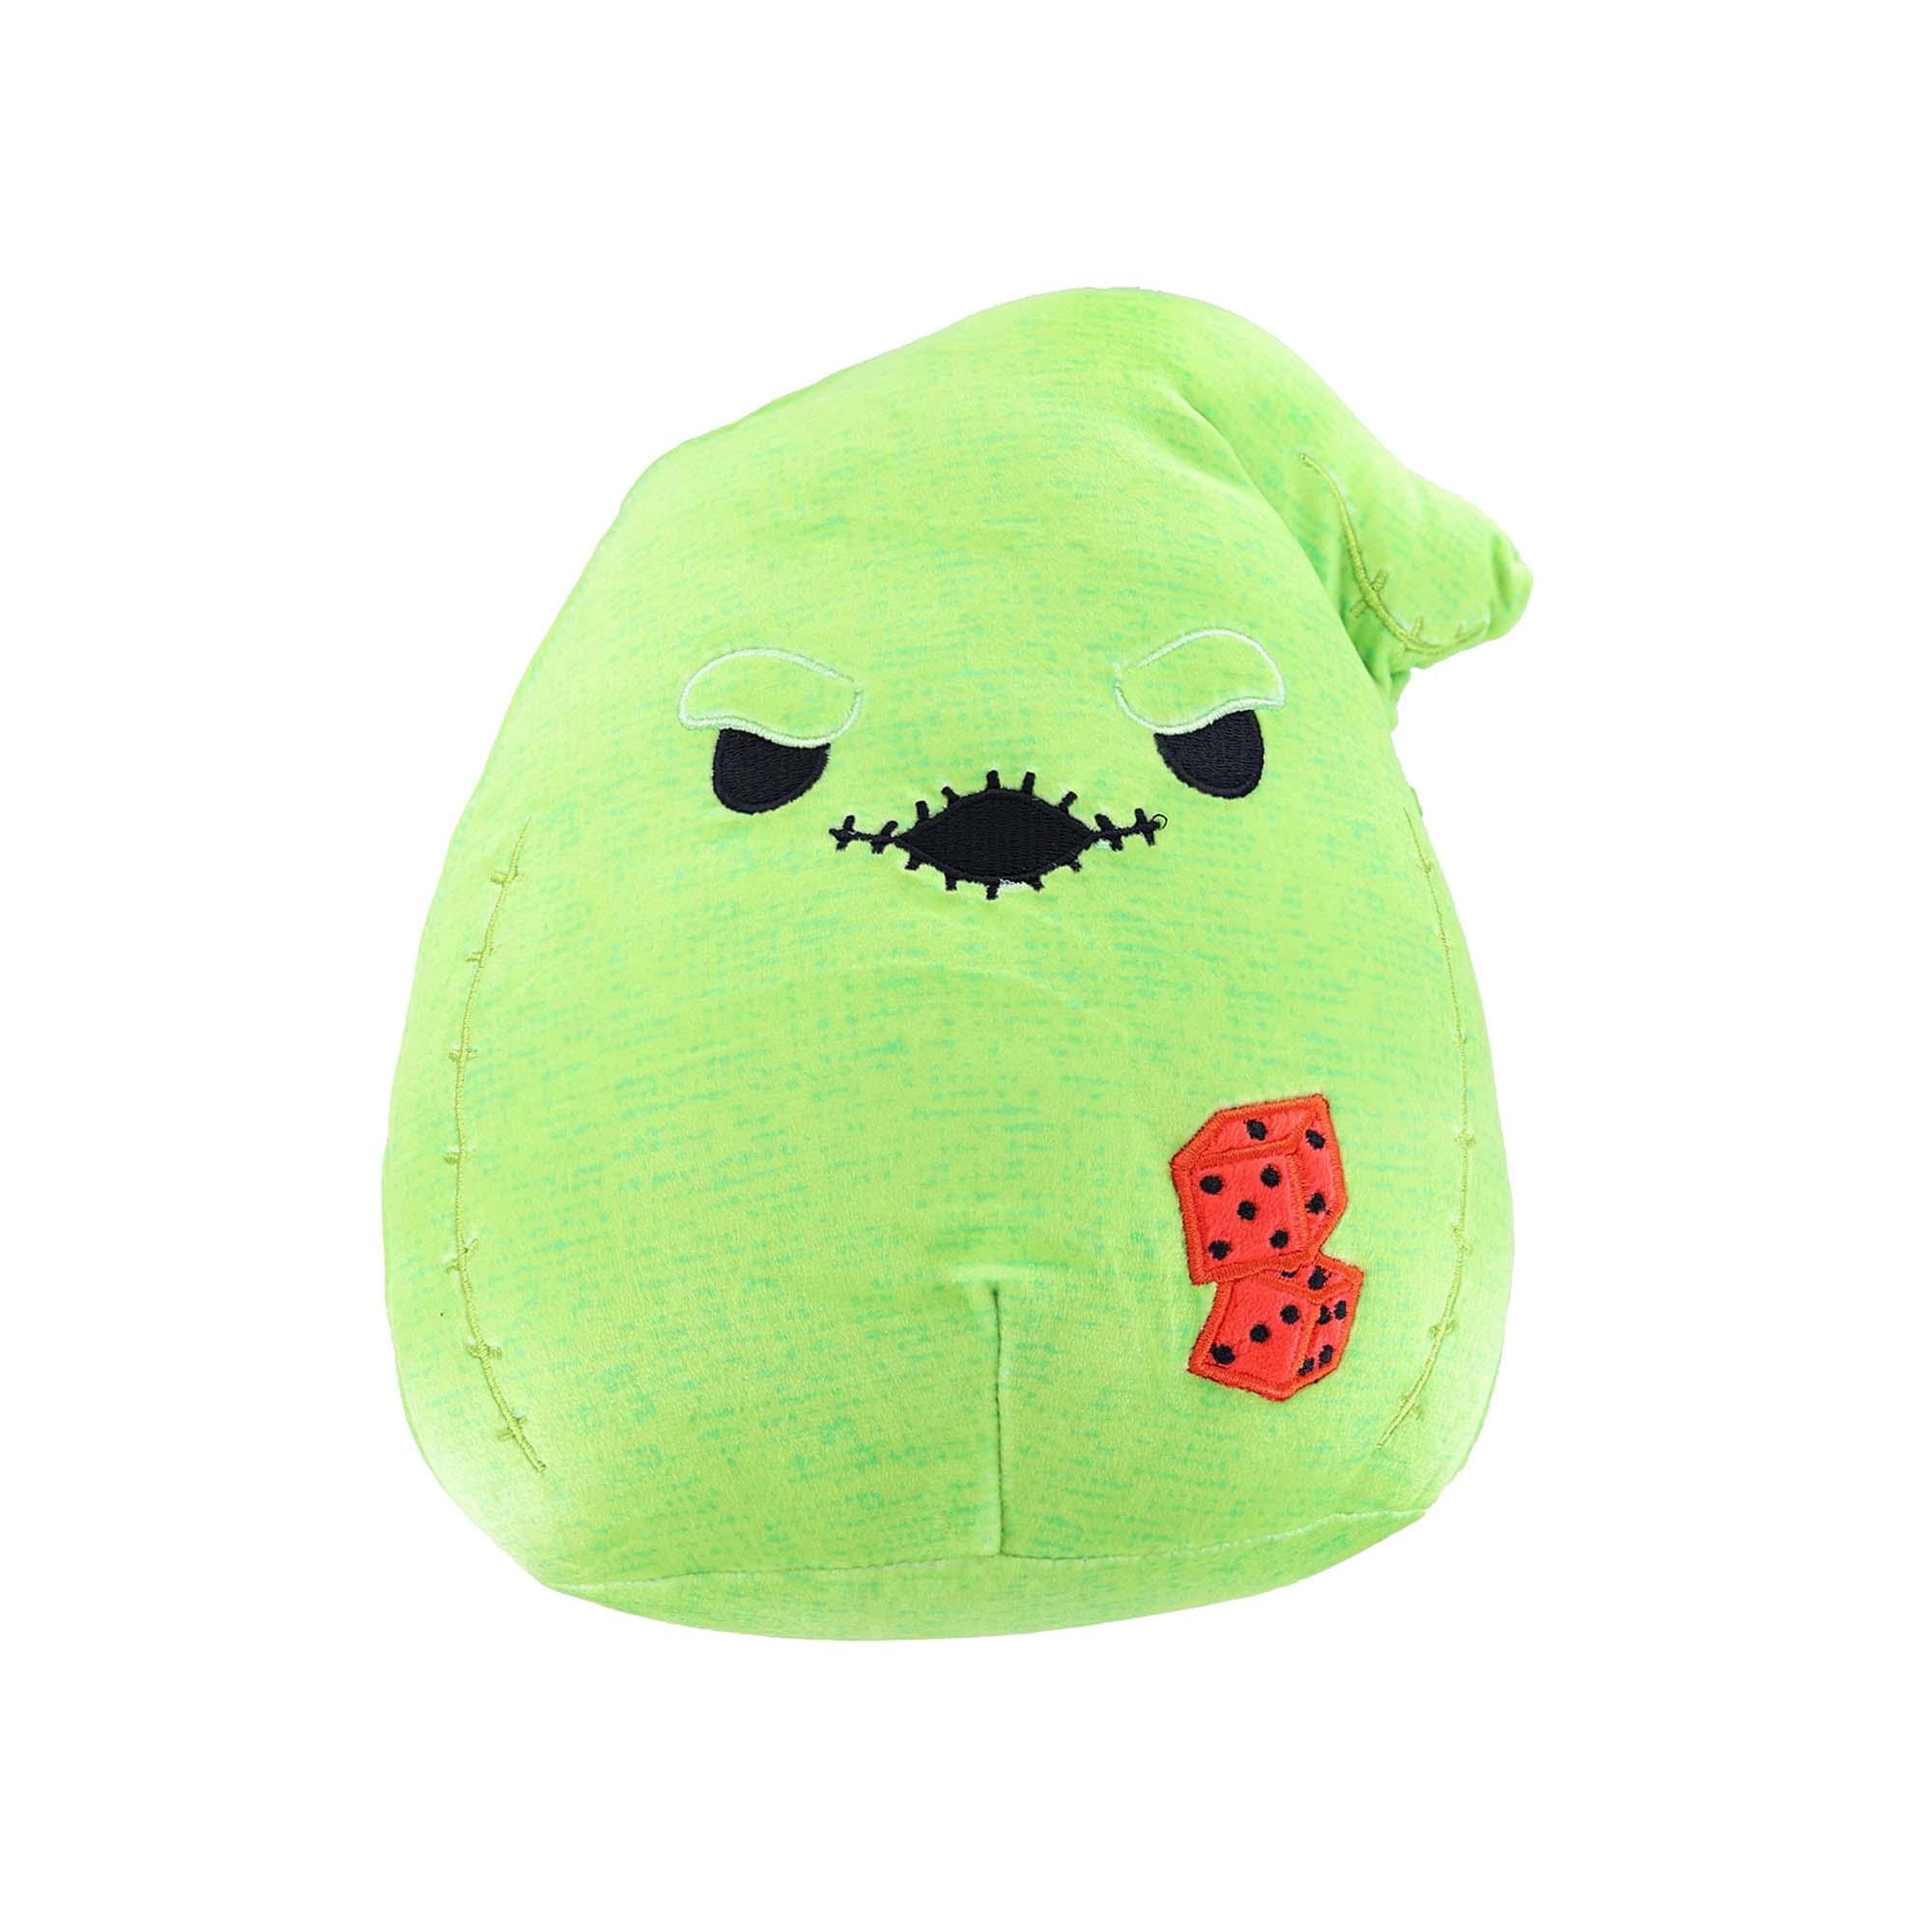 Nightmare Before Christmas Squishmallow 8 Inch Plush , Oogie Boogie